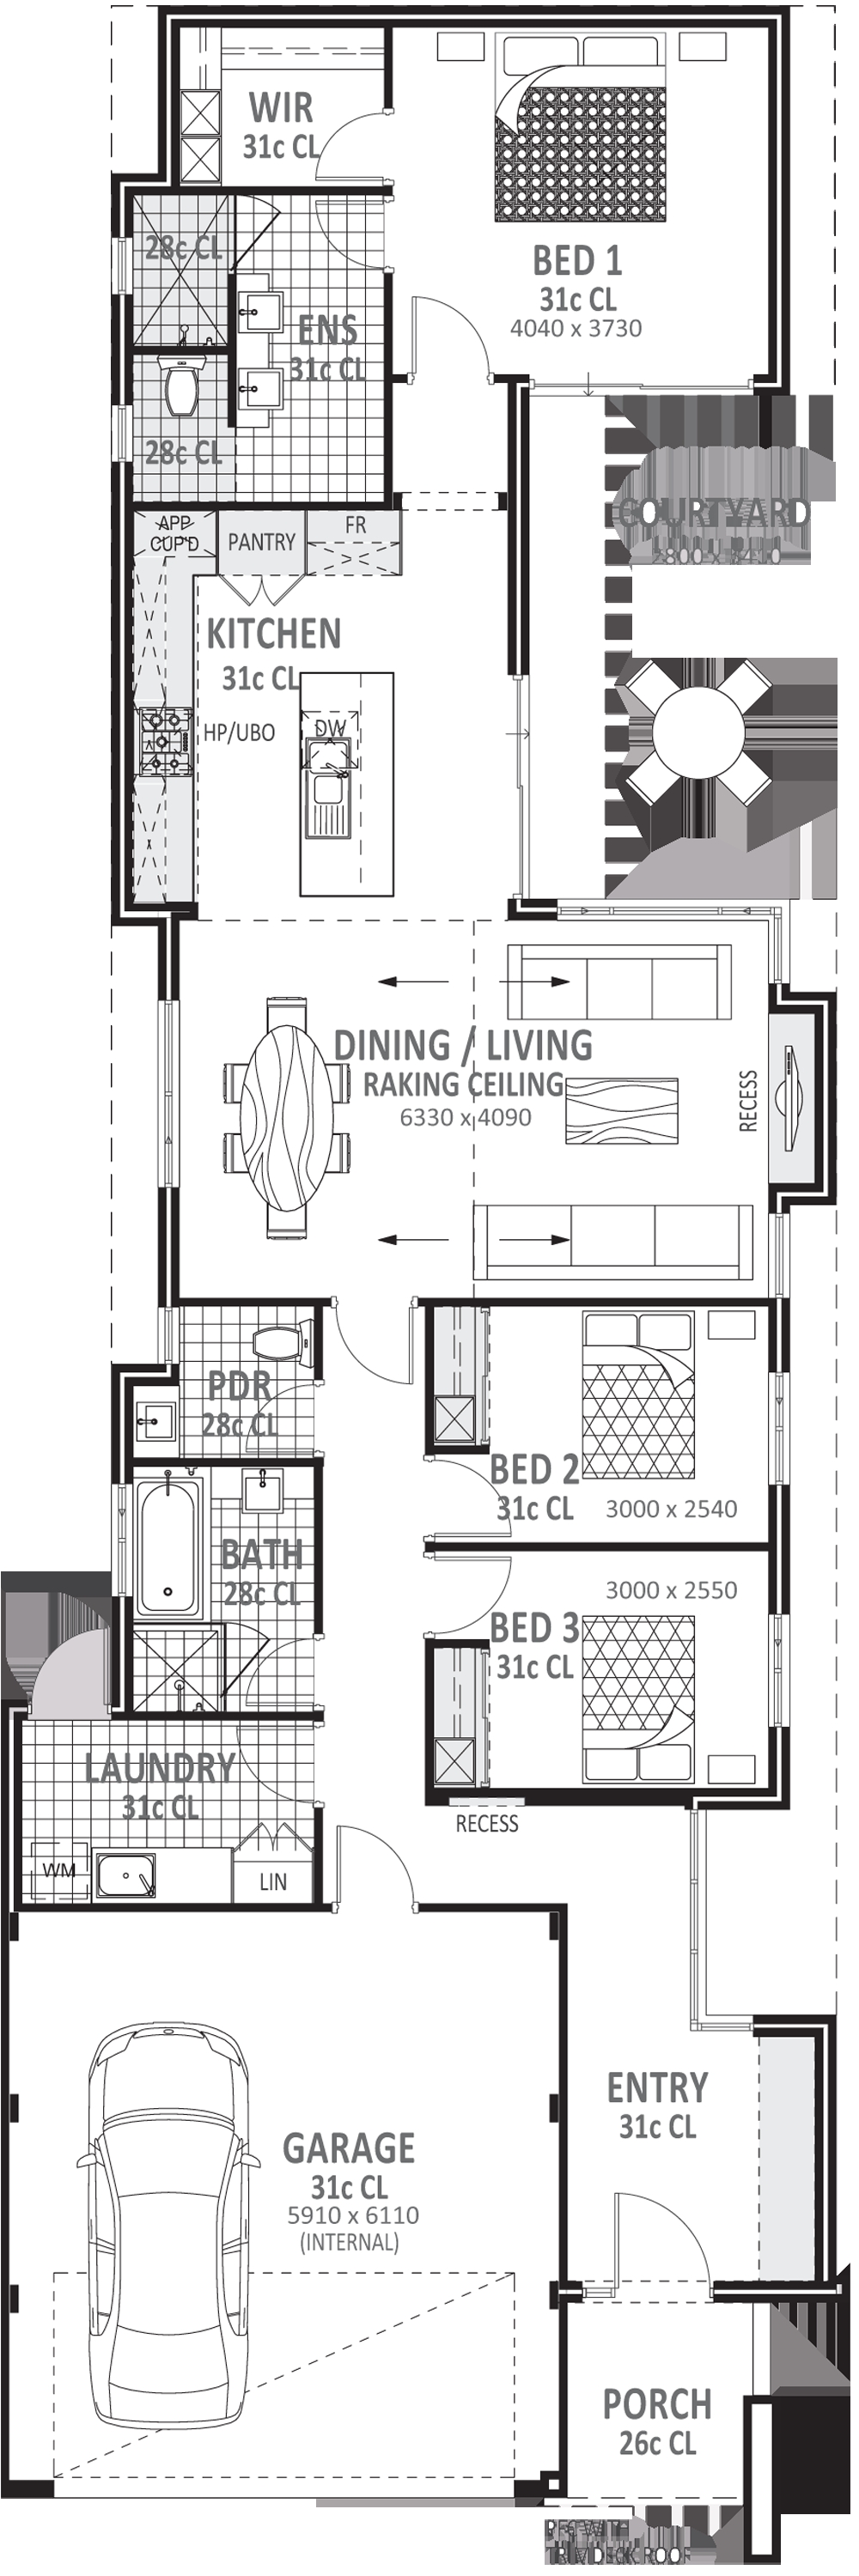 House Plans Under 200k to Build Perth 10m Wide House Plans Home Designs Perth Vision One Homes